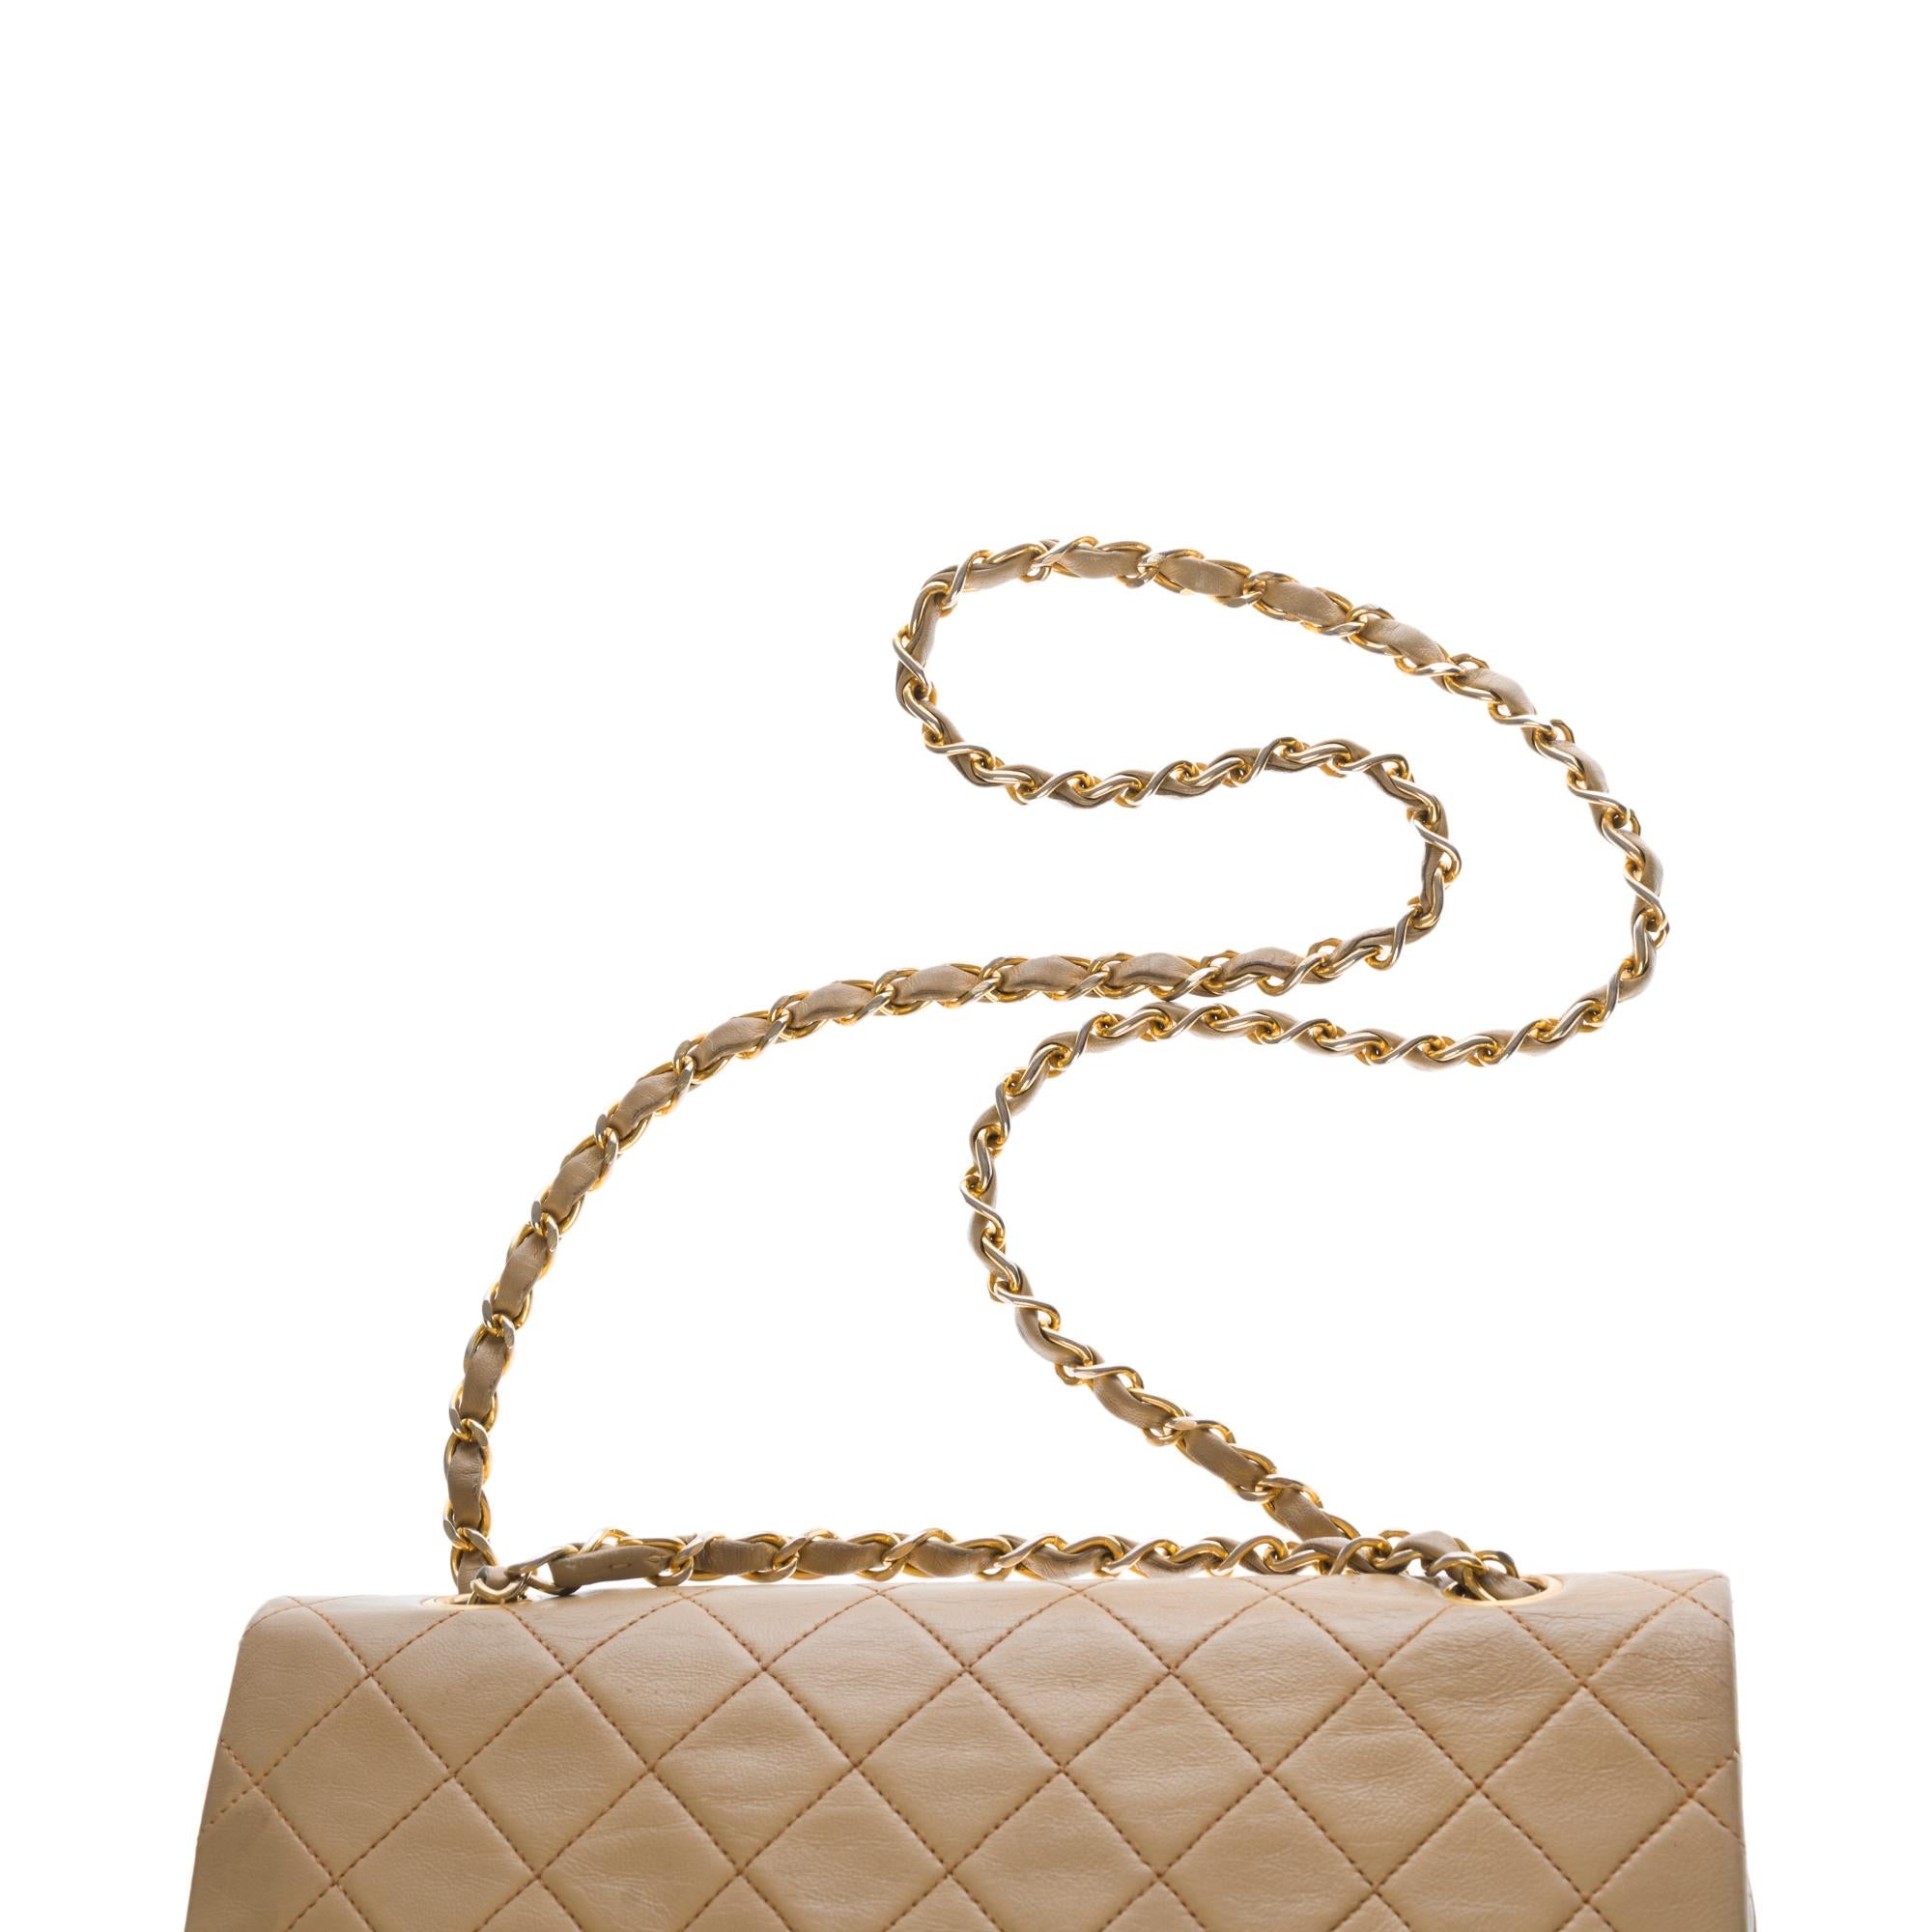 Chanel Timeless double flap Medium Shoulder bag in beige quilted leather, GHW 2